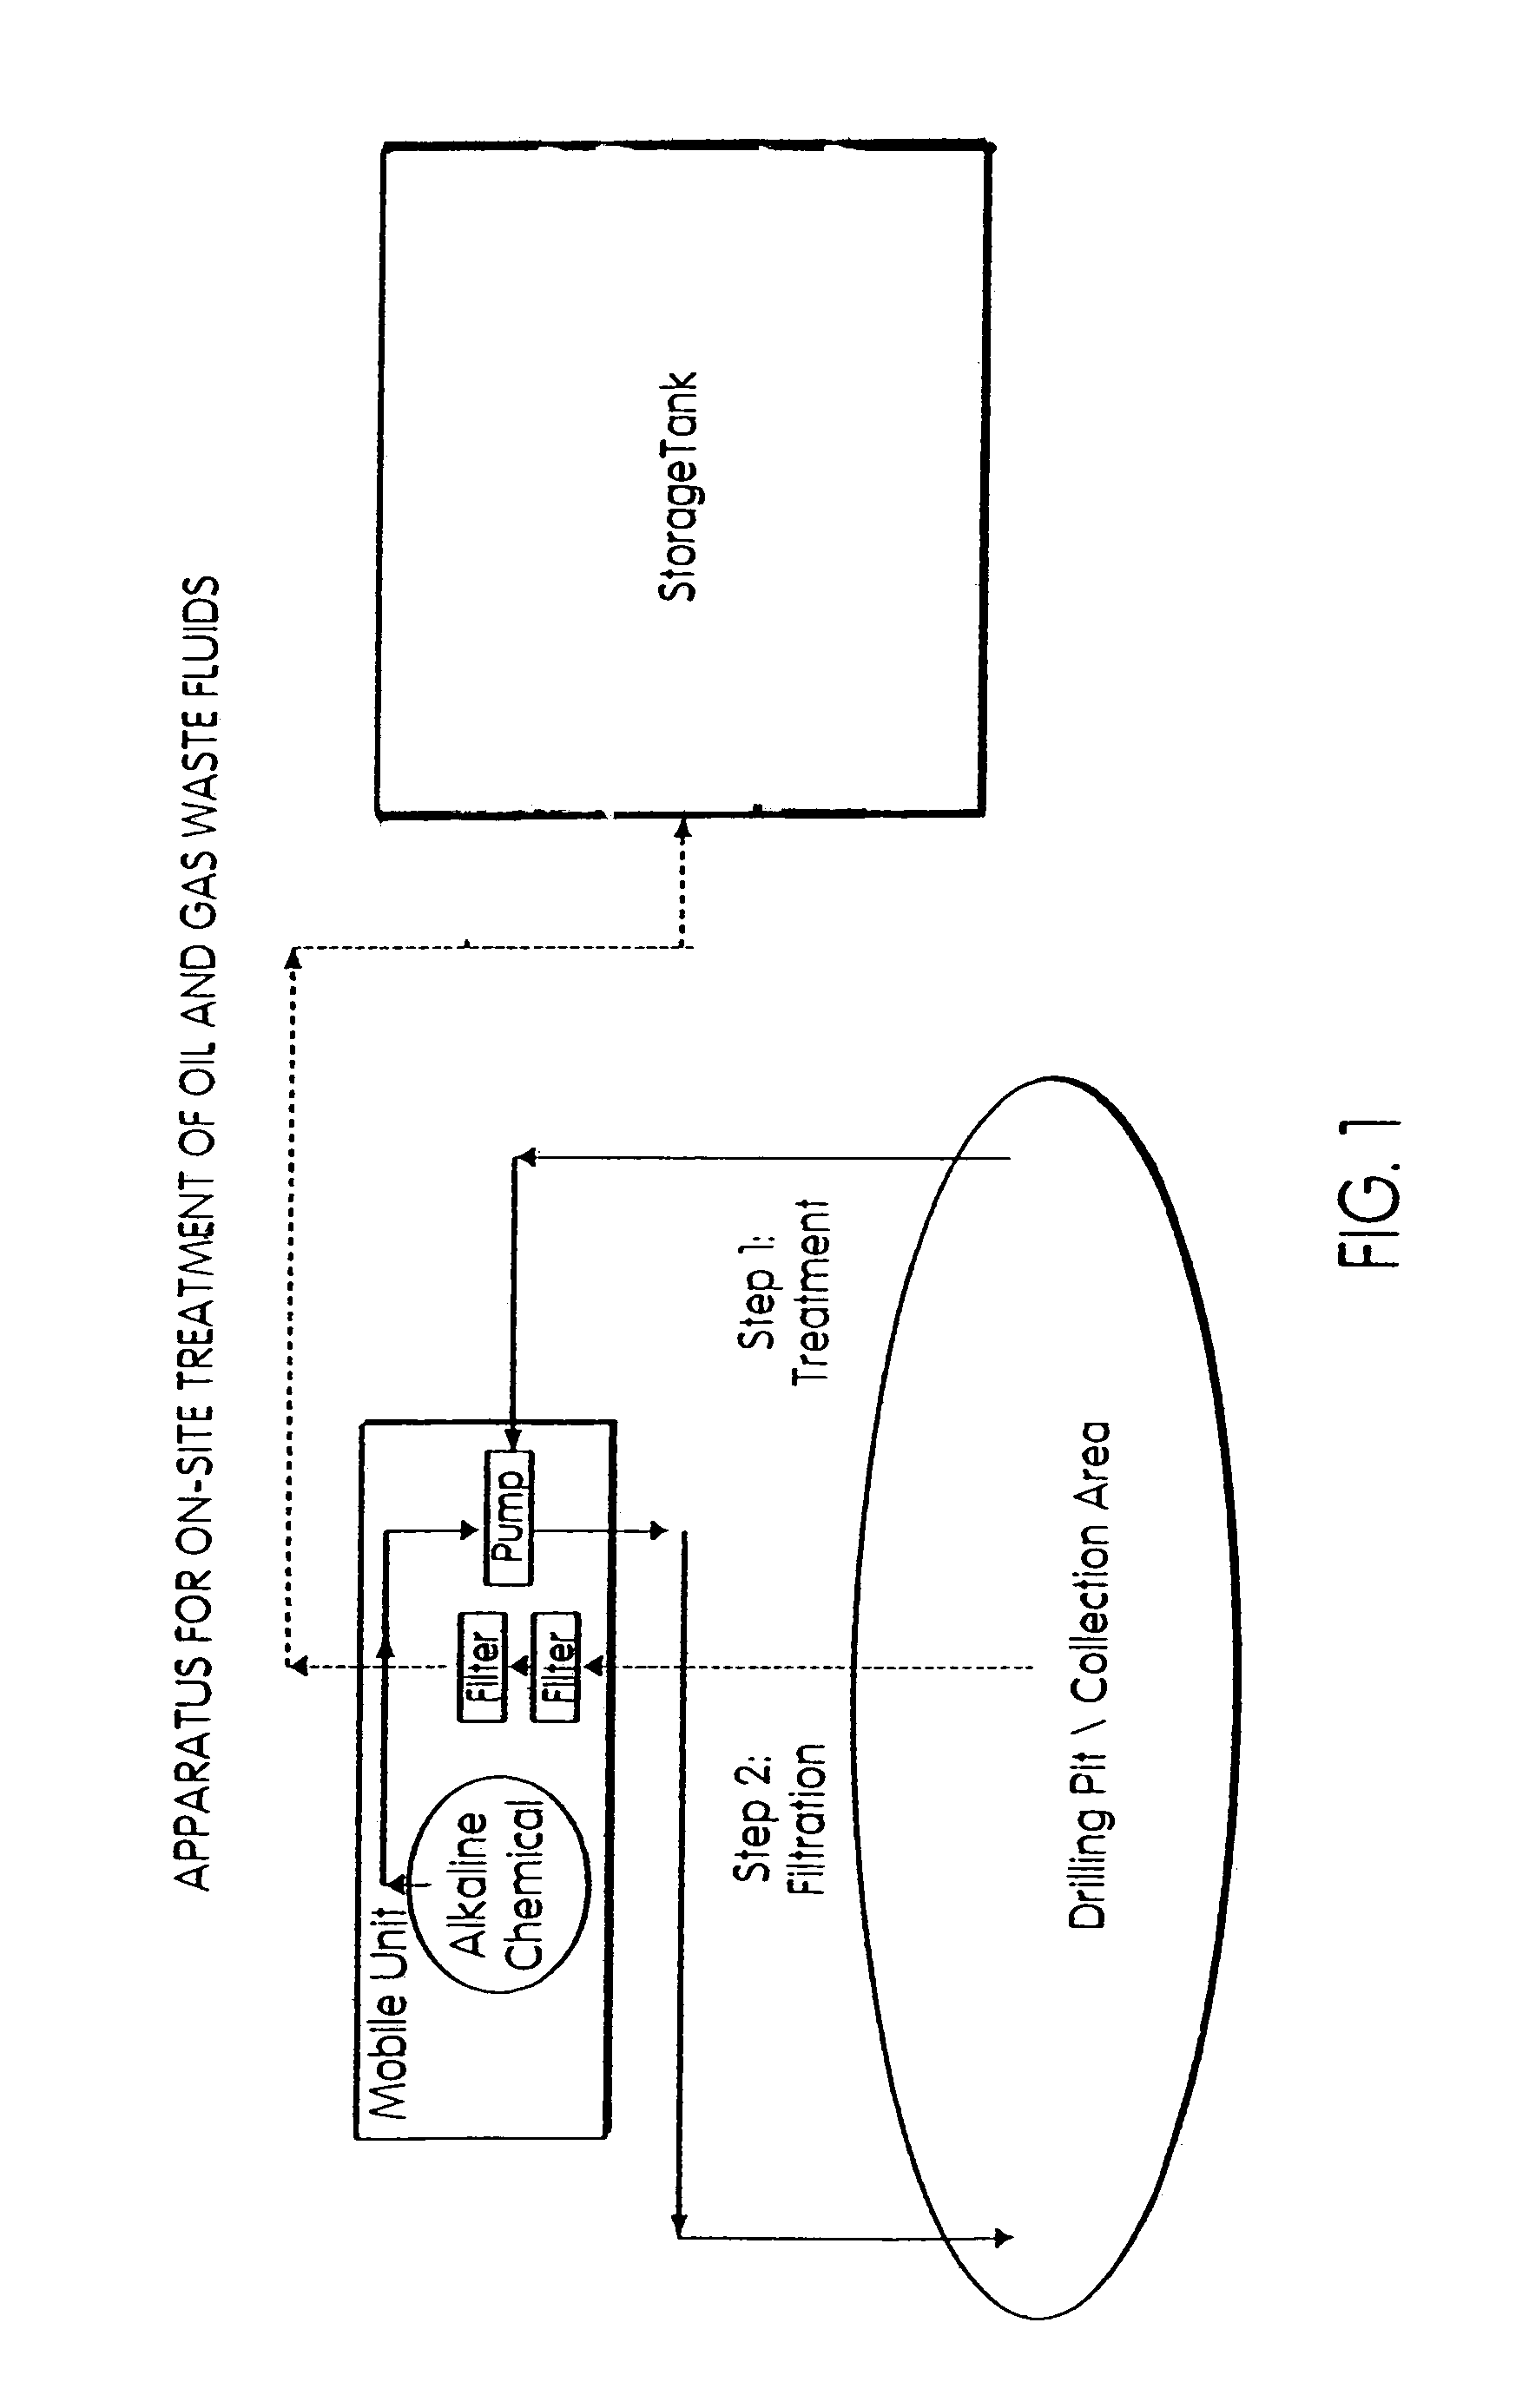 Method for on-site treatment of oil and gas well waste fluids